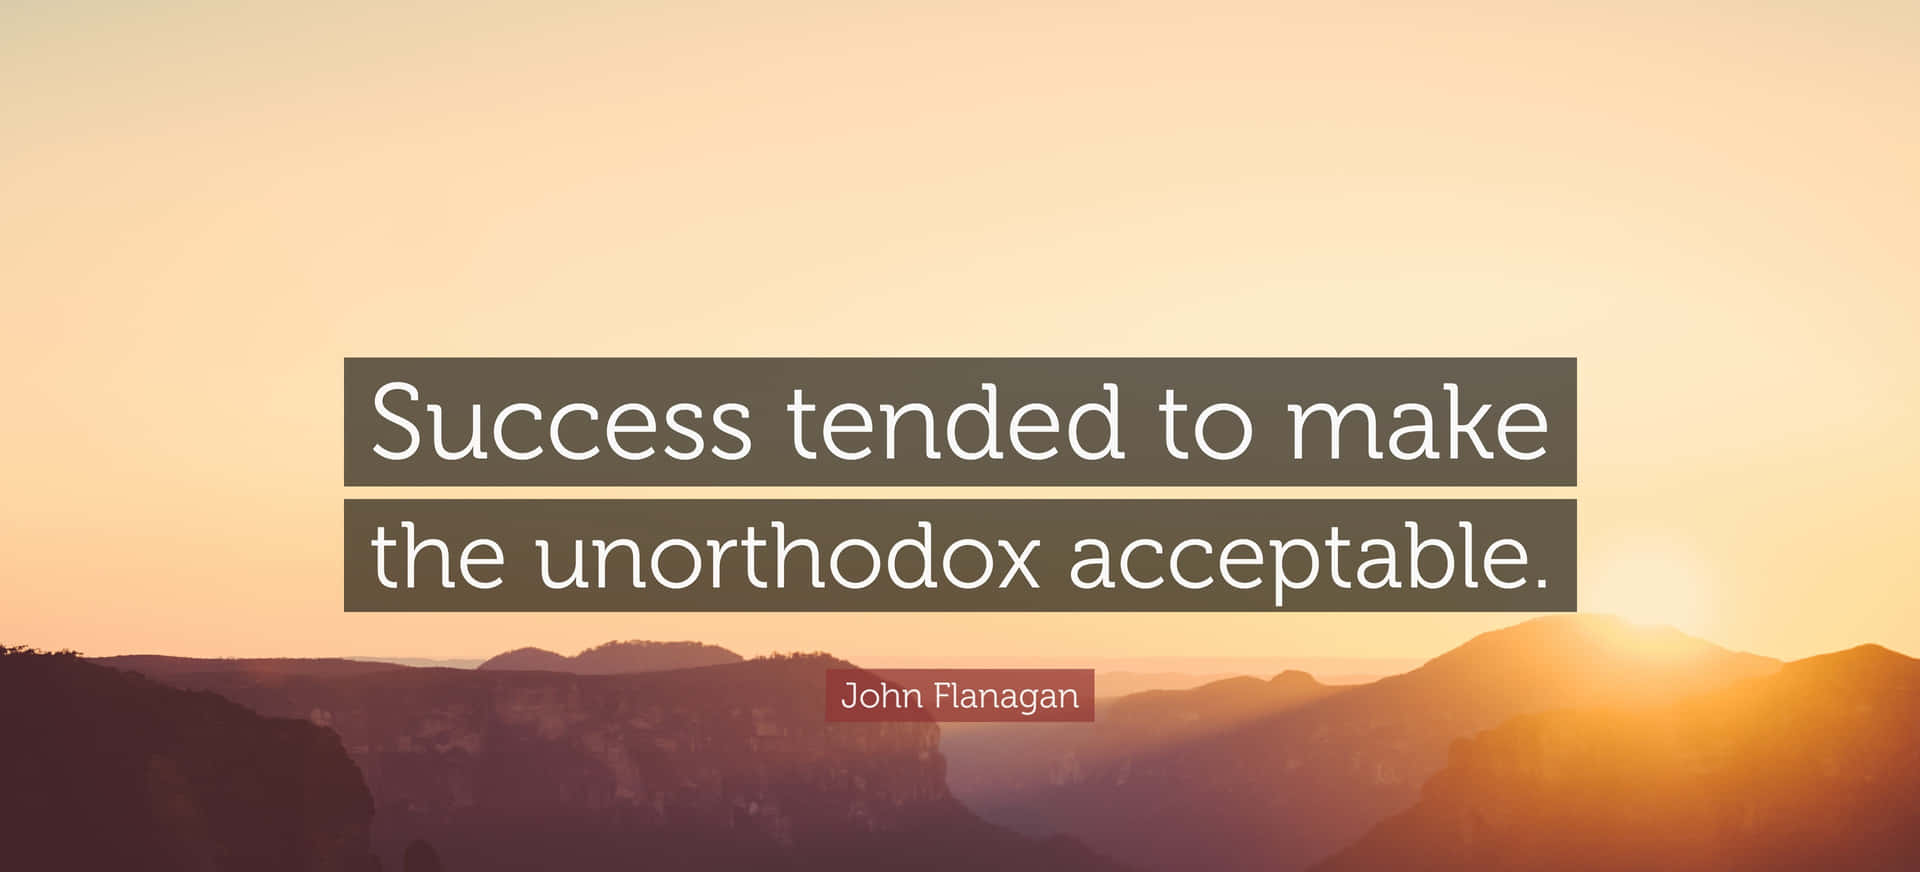 Unorthodox Quote About Success Wallpaper